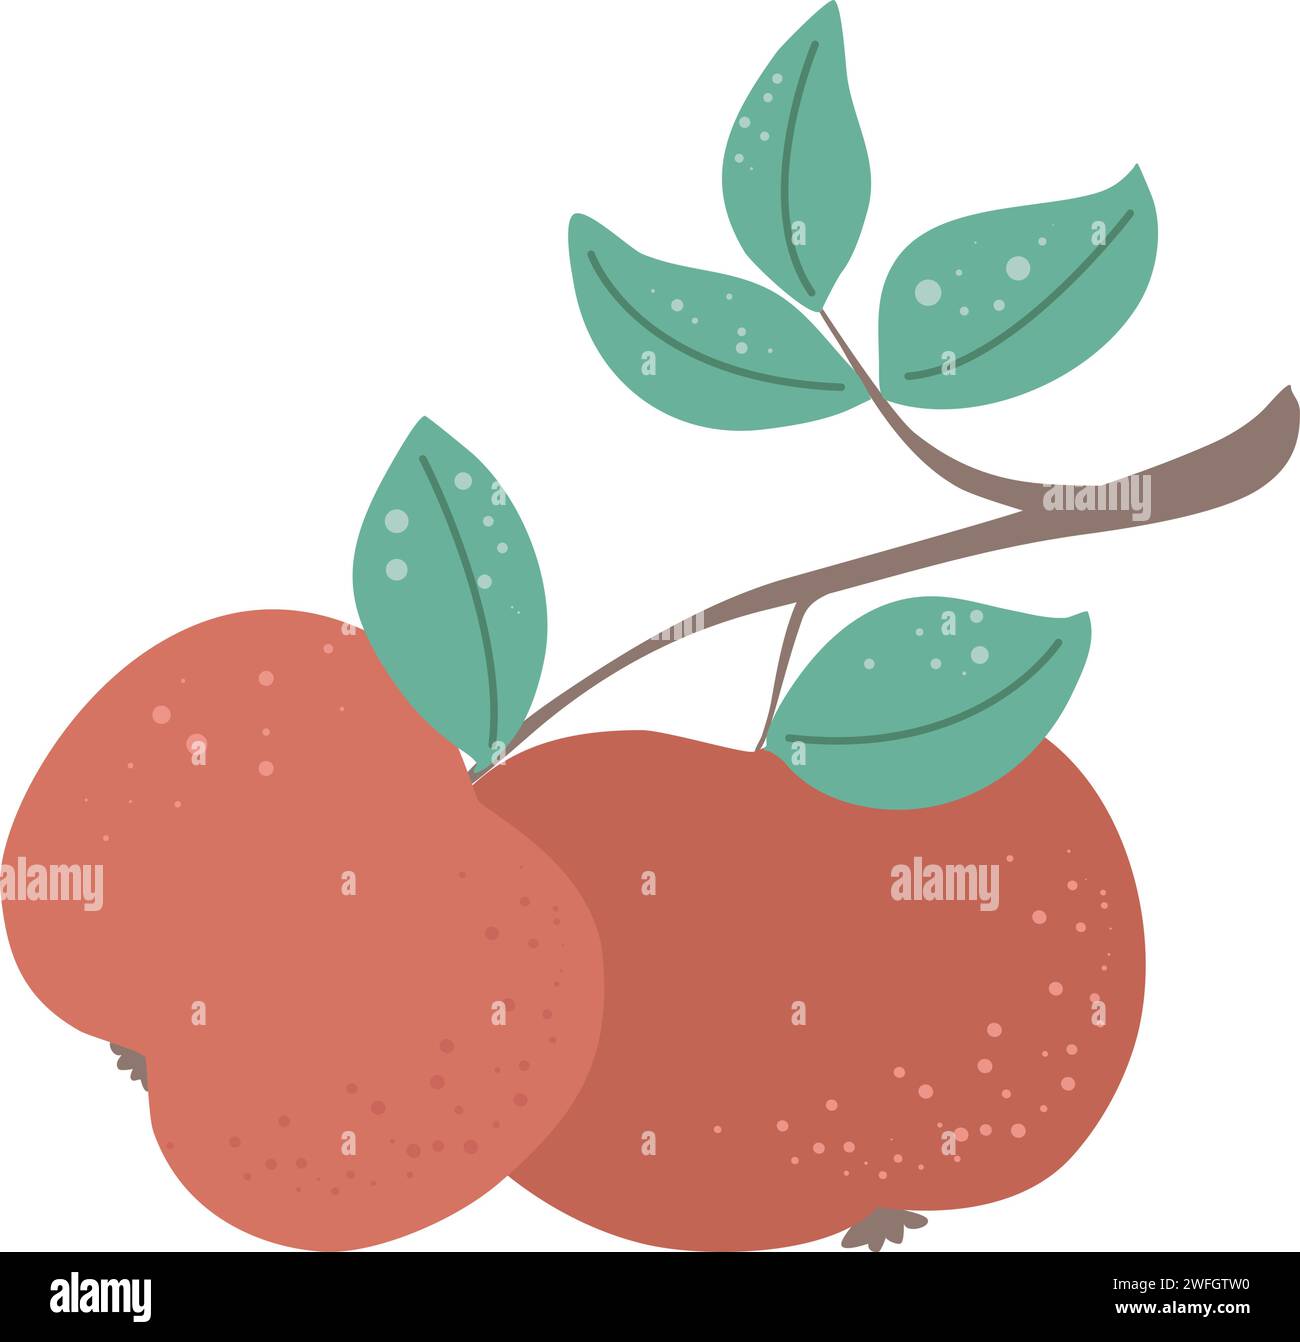 Texture hand drawn apples clip art. Simple red ripe apples on branch. Healthy organic food isolated vector illustration Stock Vector